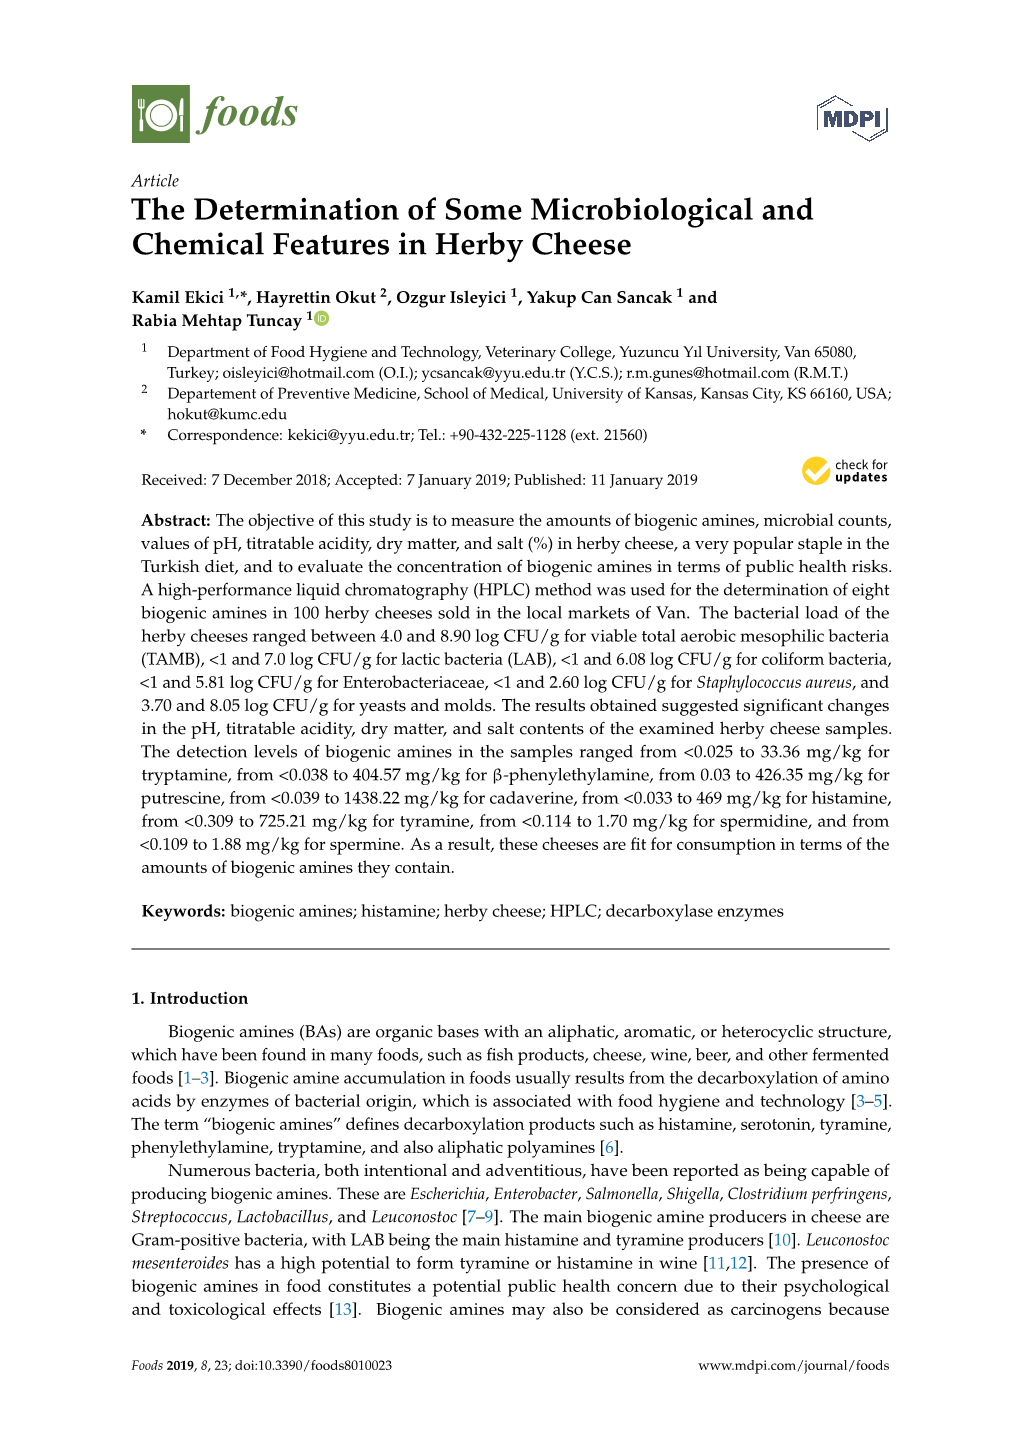 The Determination of Some Microbiological and Chemical Features in Herby Cheese